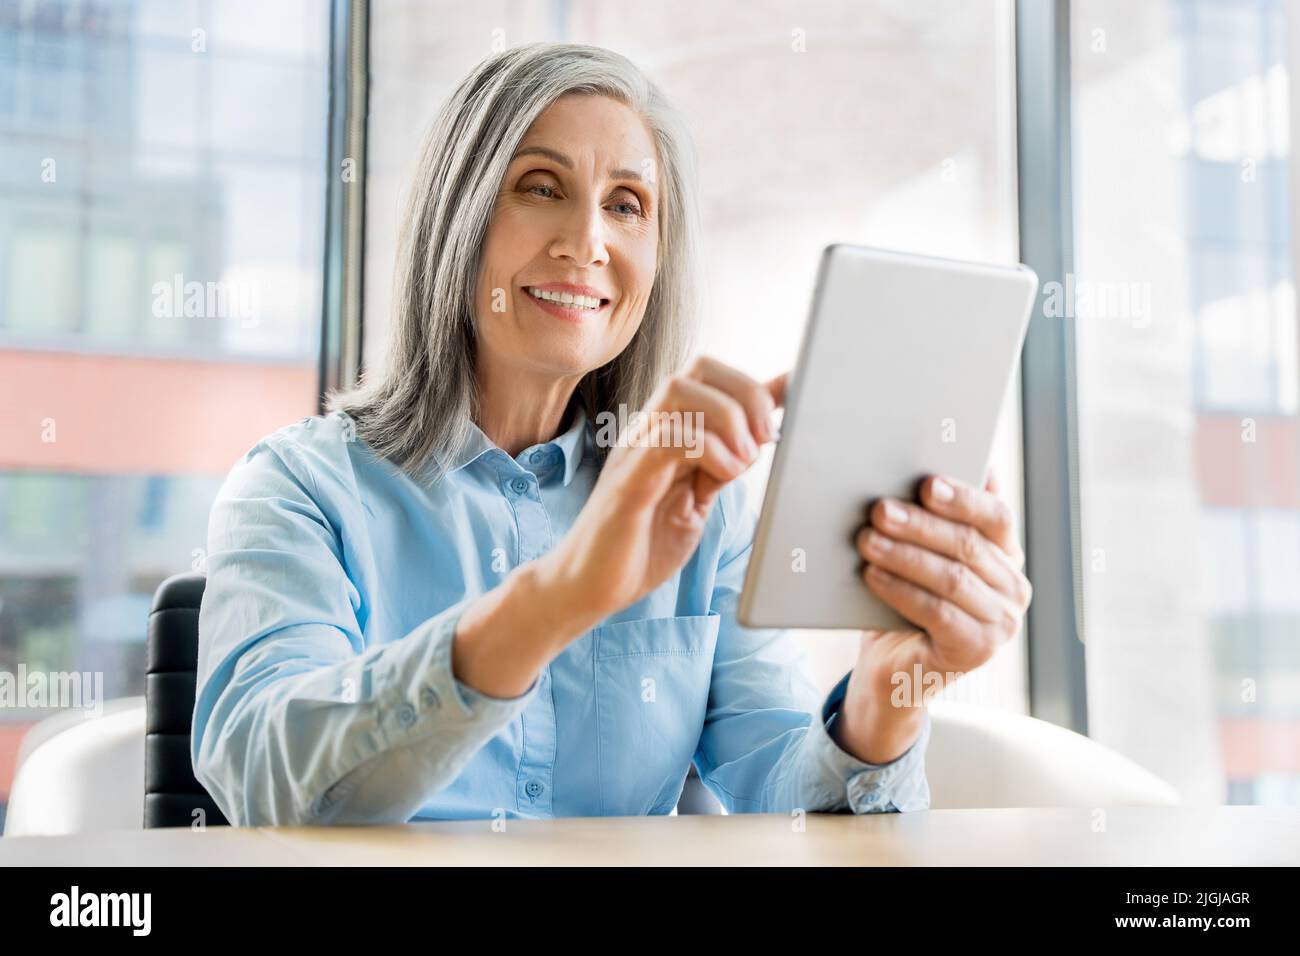 60s older mature woman sit in office and use digital tablet Stock Photo